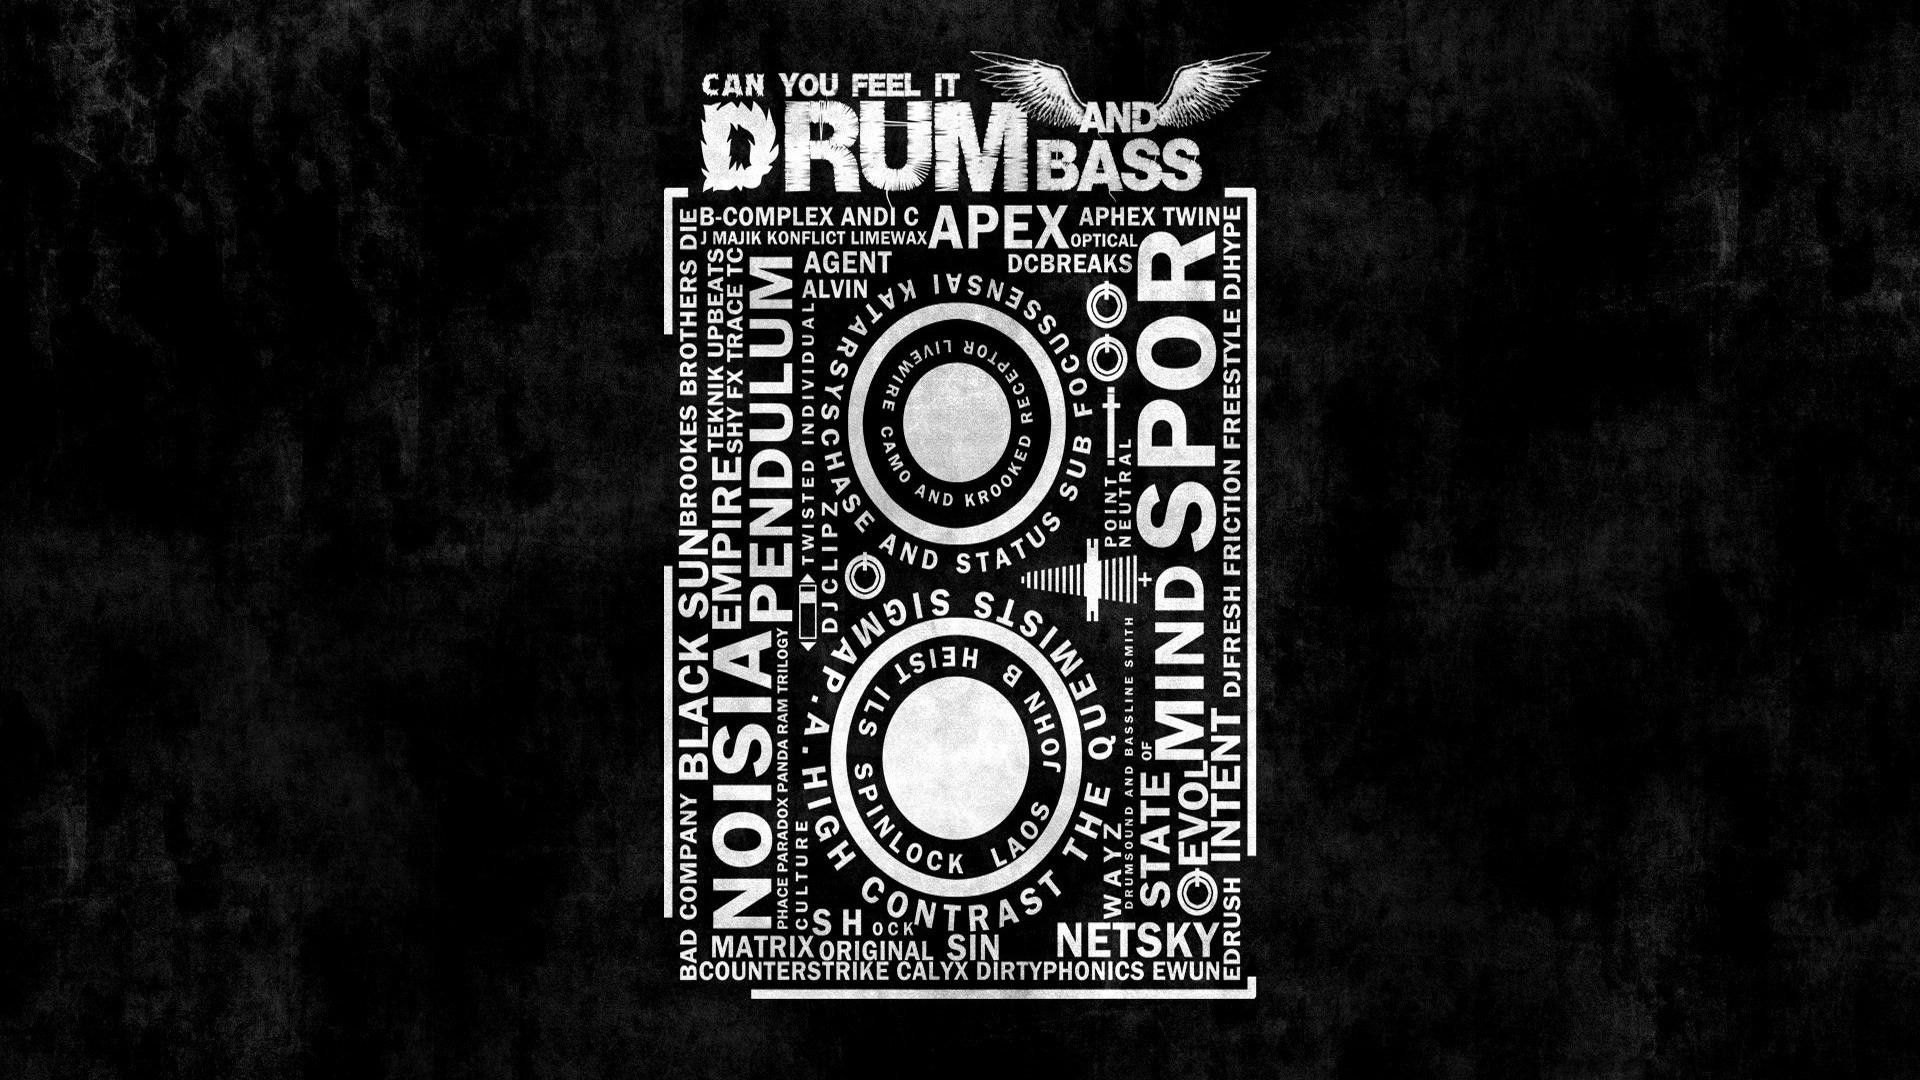 Drum and Bass Wallpaper